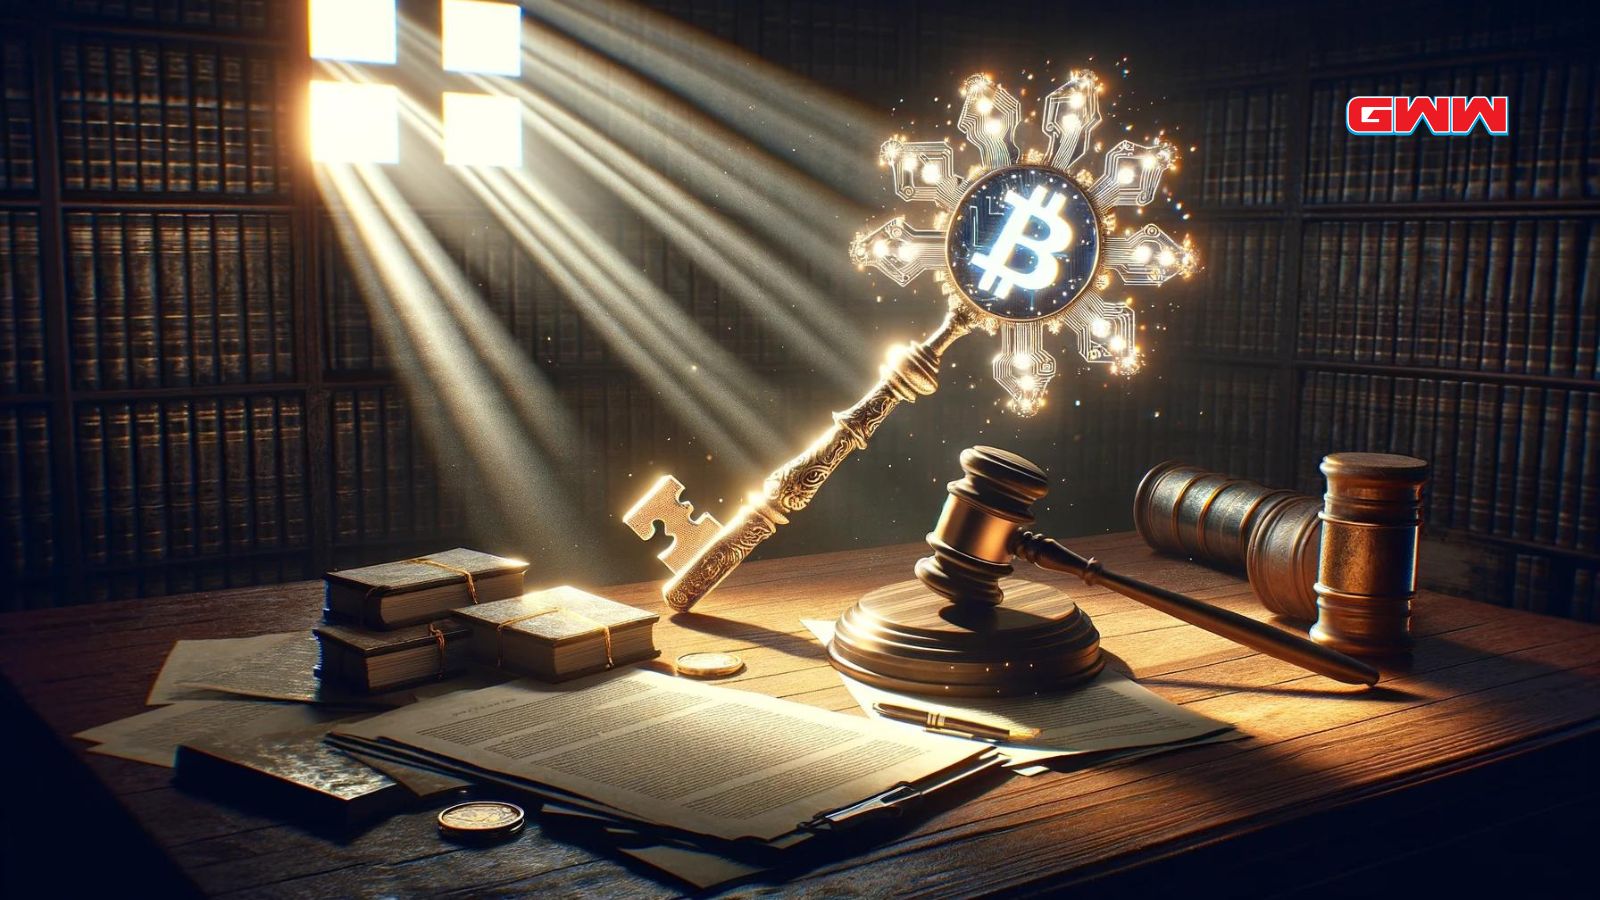 Key unlocking bitcoin, legal cryptocurrency concept